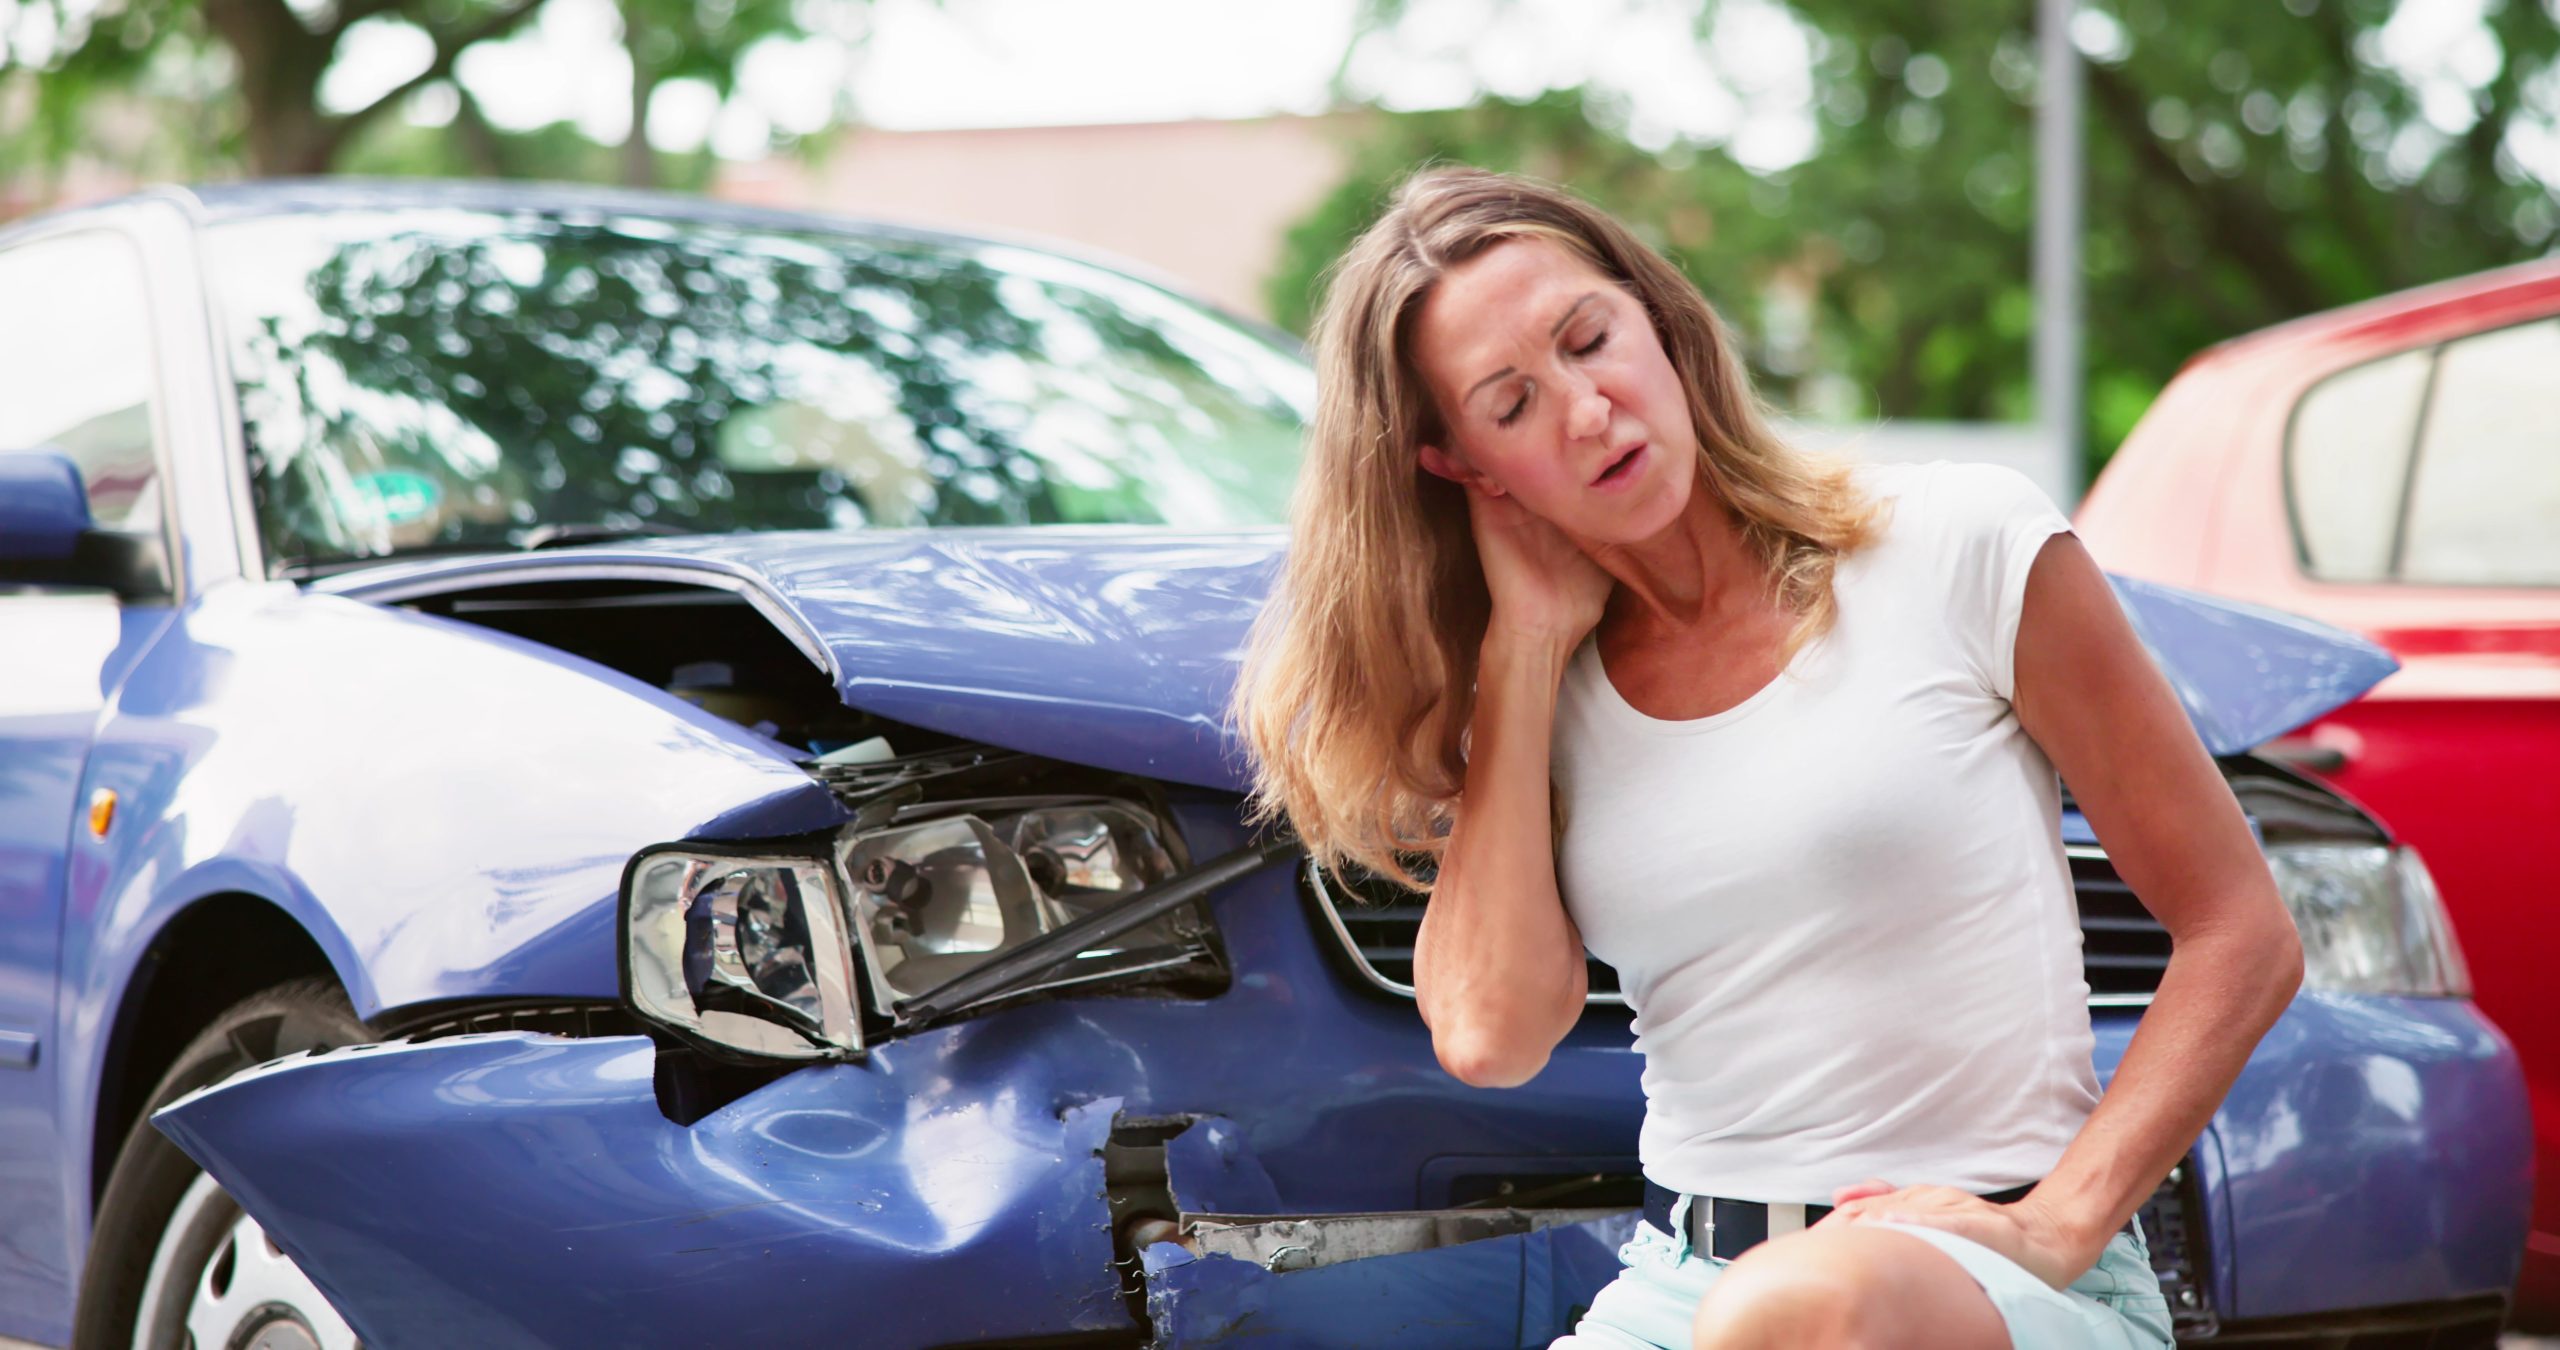 Chiropractic Treatment For Car/Auto Accident Injury Near Lynnwood, WA